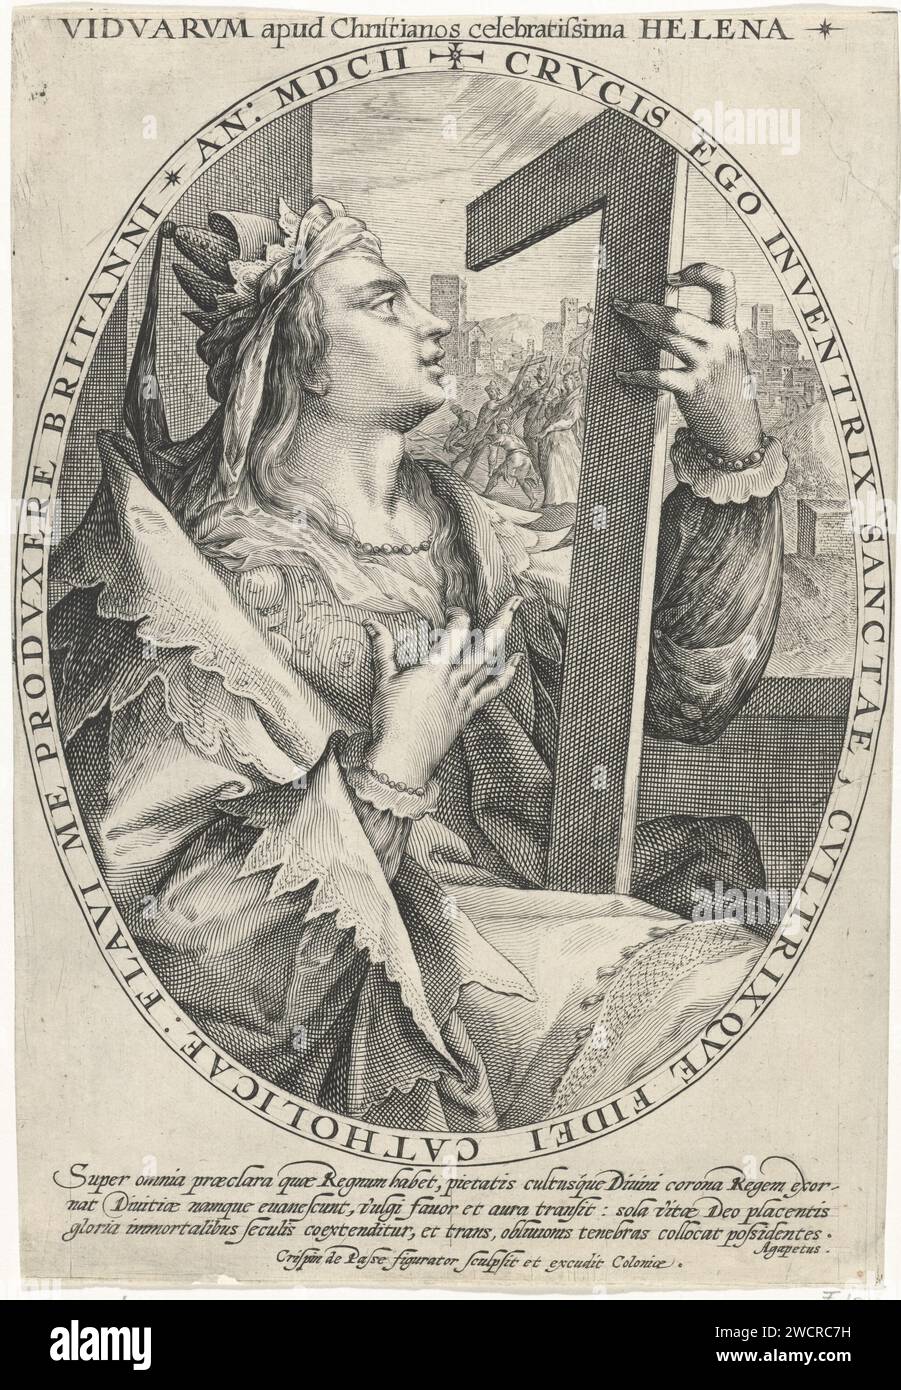 Holy Helena, Crispijn van de Passe (I), 1602 print The H. Helena with the cross in her hand. In the background the discovery by St. Helena of the true cross of Christ. The show is caught in an oval frame with an edge writing in Latin. In the margin a three -faced caption in Latin. Print from a series with famous women. Cologne paper engraving empress Helena, mother of Constantine the Great; possible attributes: model of church, (royal) crown, crown of thorns, cross, three nails. the finding of the True Cross. St. Helena (one of the nine worthiest women) Stock Photo